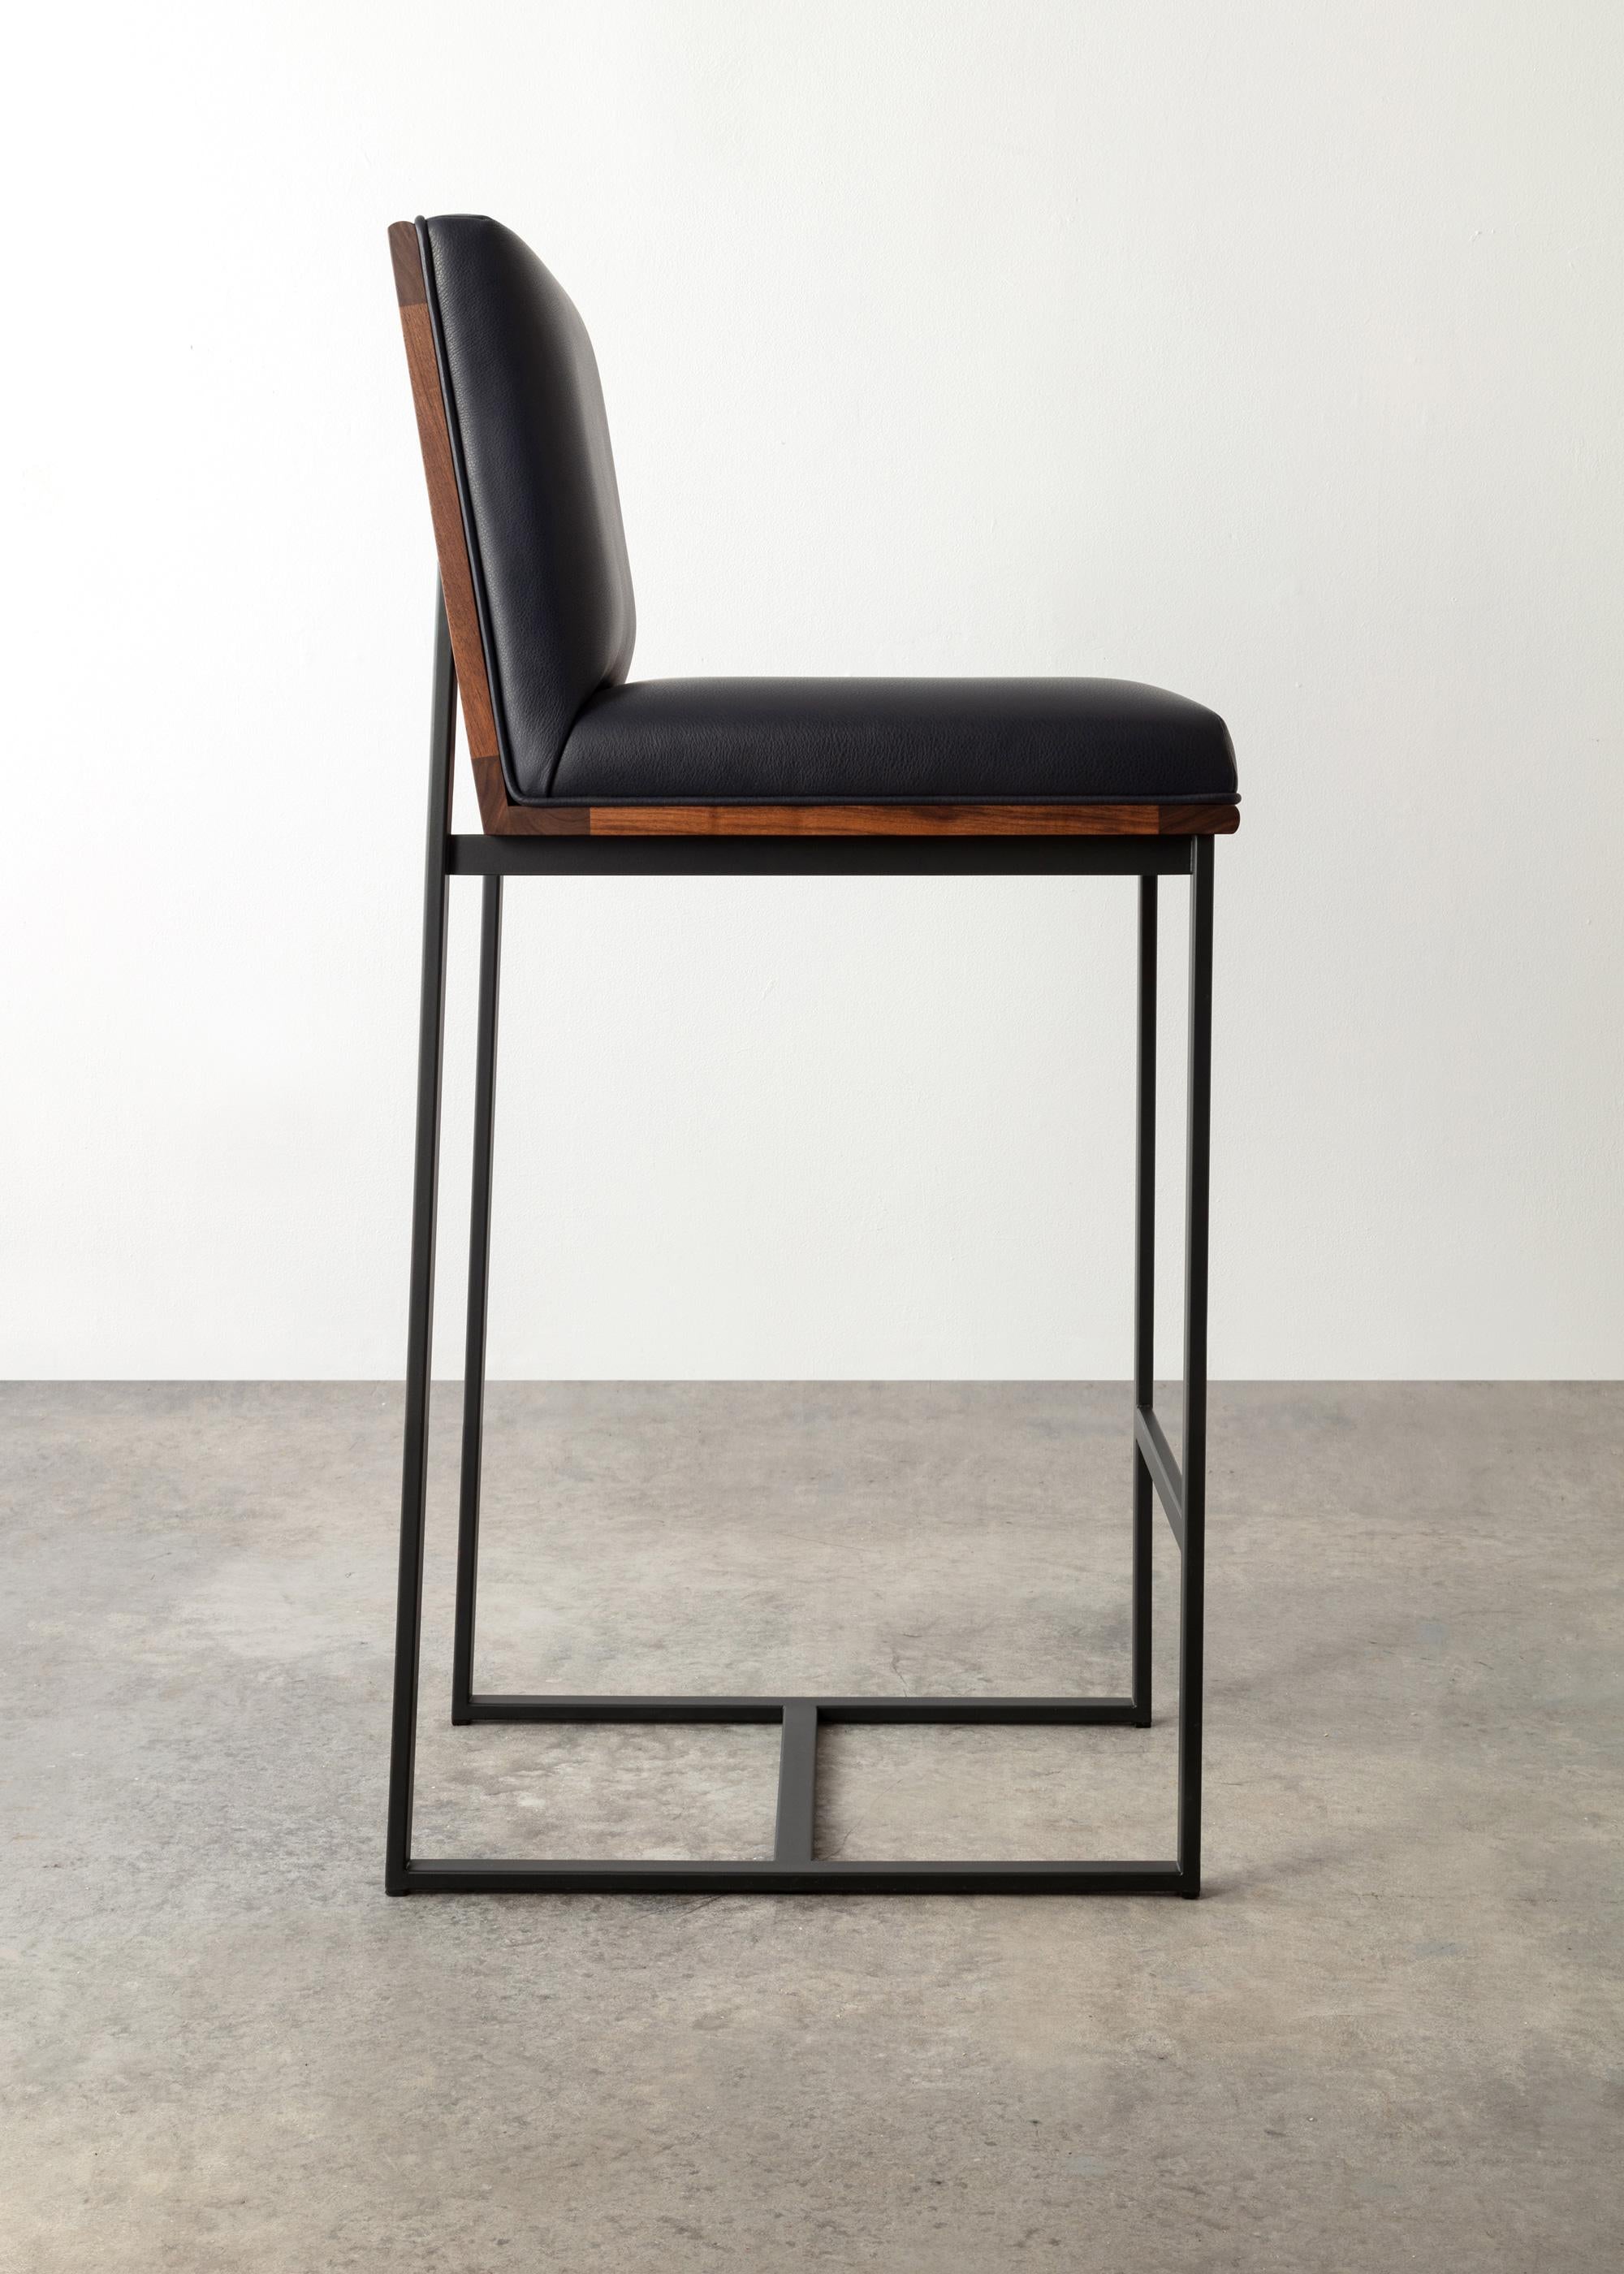 The DGD bar stool finds formality and comfort in the industrial and organic.
Shown in walnut with navy leather
Available ash, cherry, maple, walnut, or white oak. 
Powder coated steel frame shown in matte black and available in standard RAL colors.